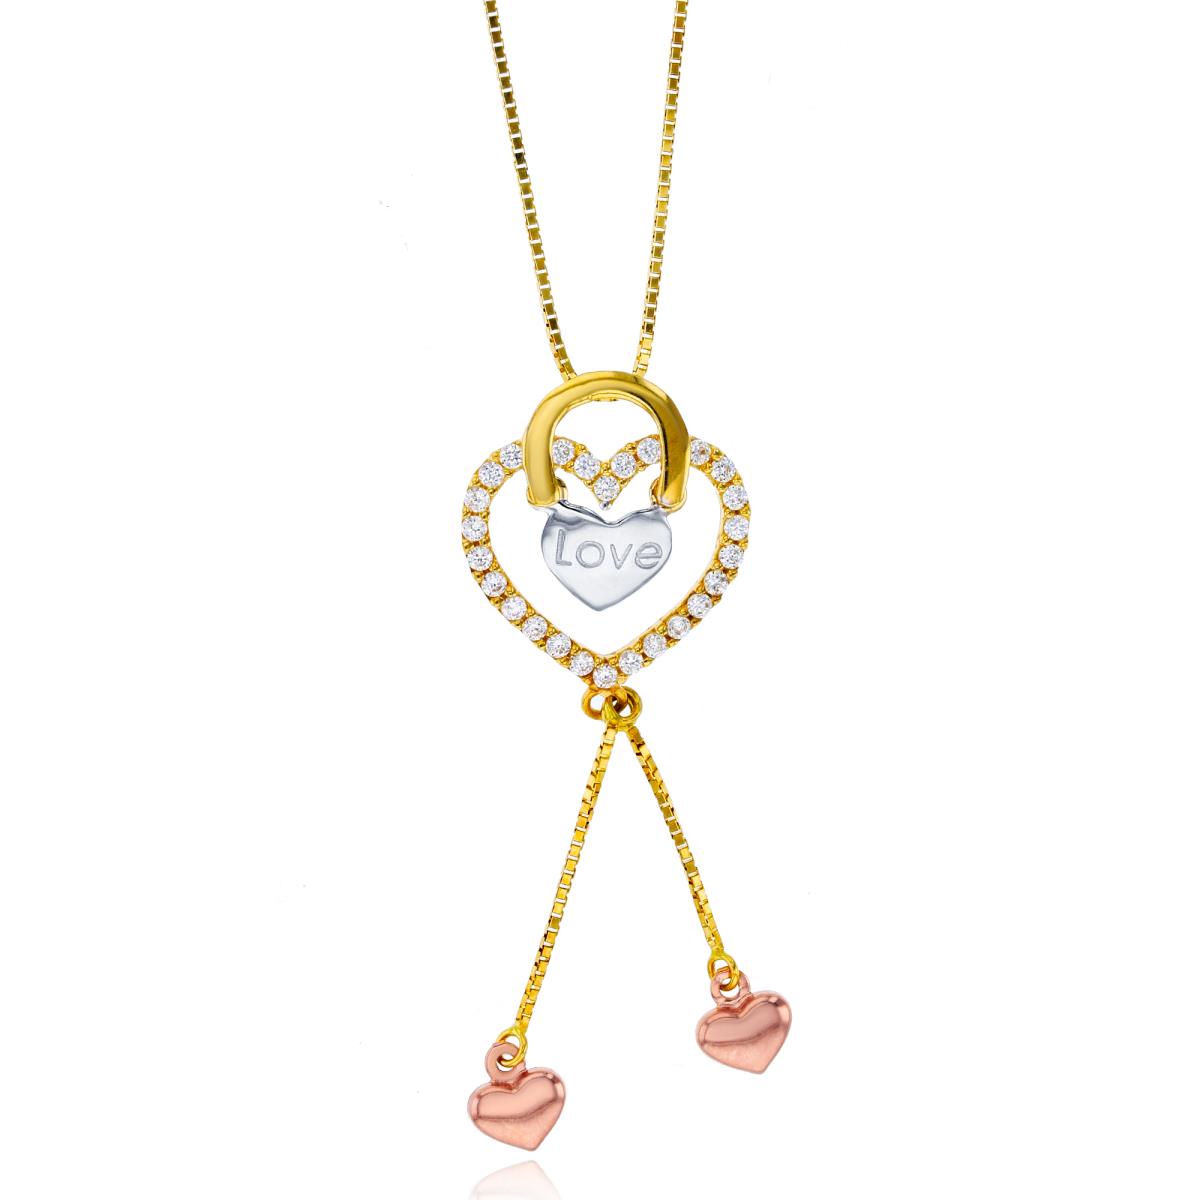 14K Tri-color Gold Love Heart 17" Necklace with Cubic Zirconia